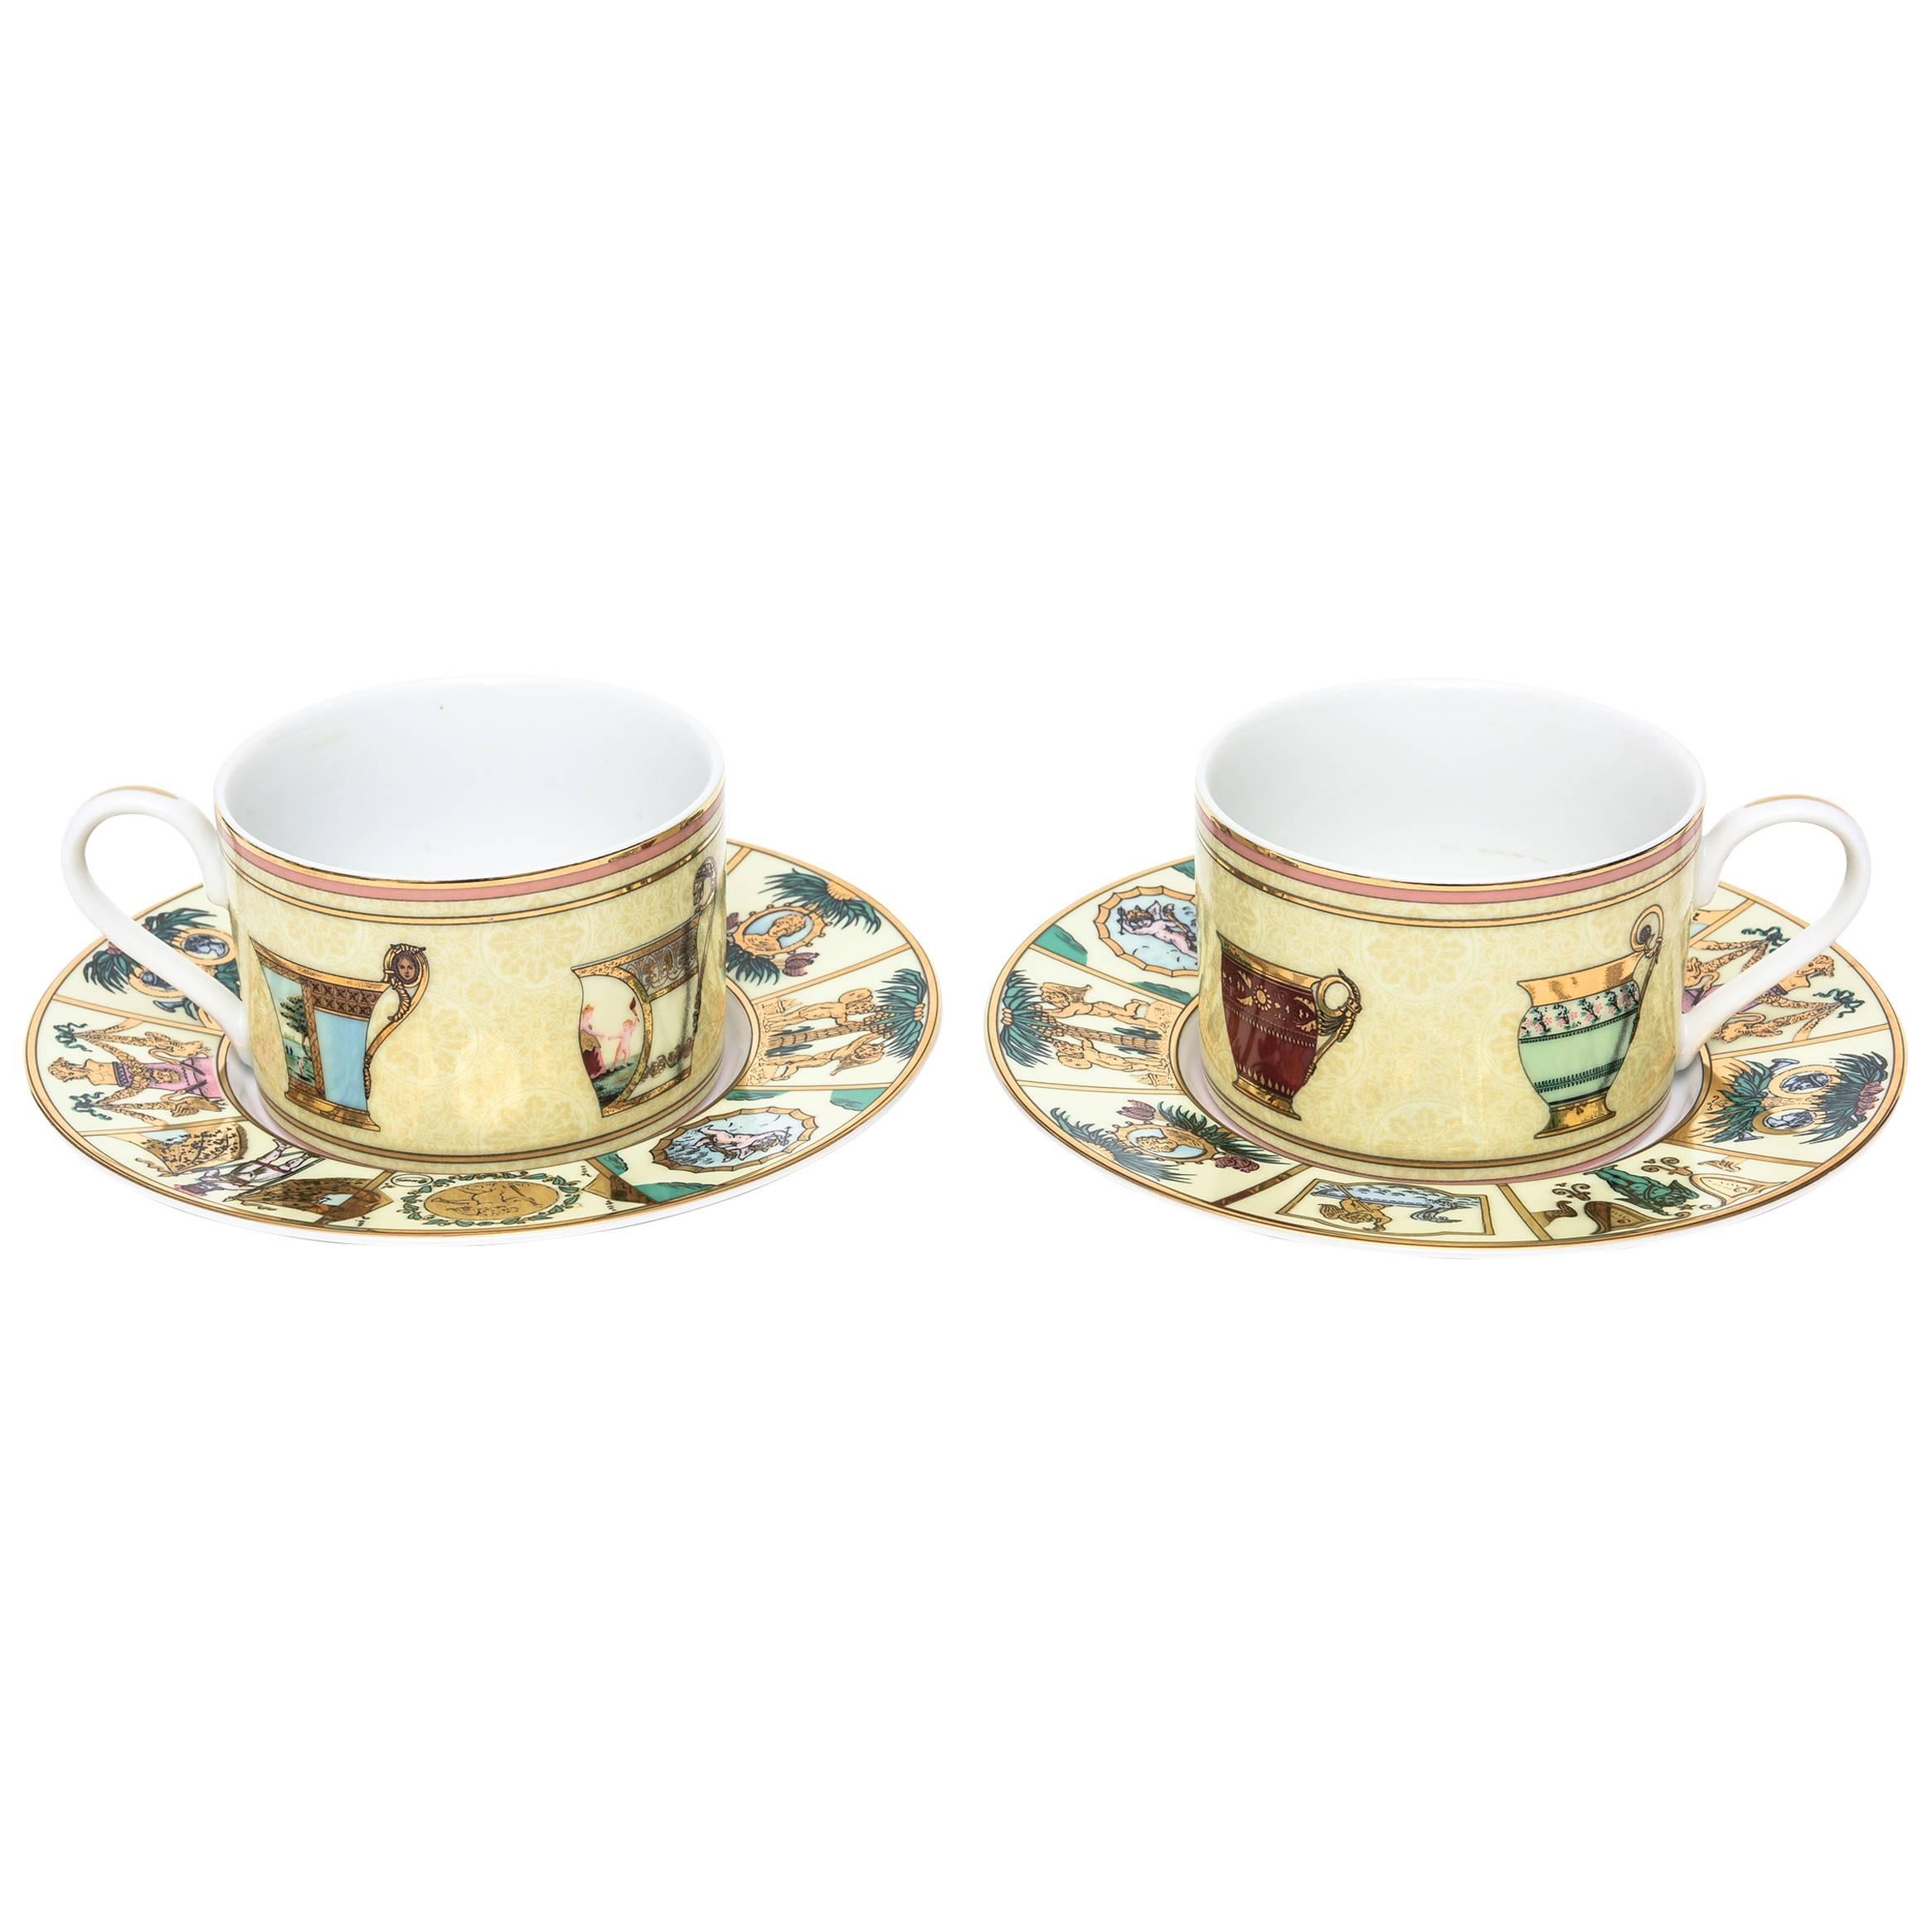 Pair of Gucci Greek Mythological Porcelain Cups and Saucers